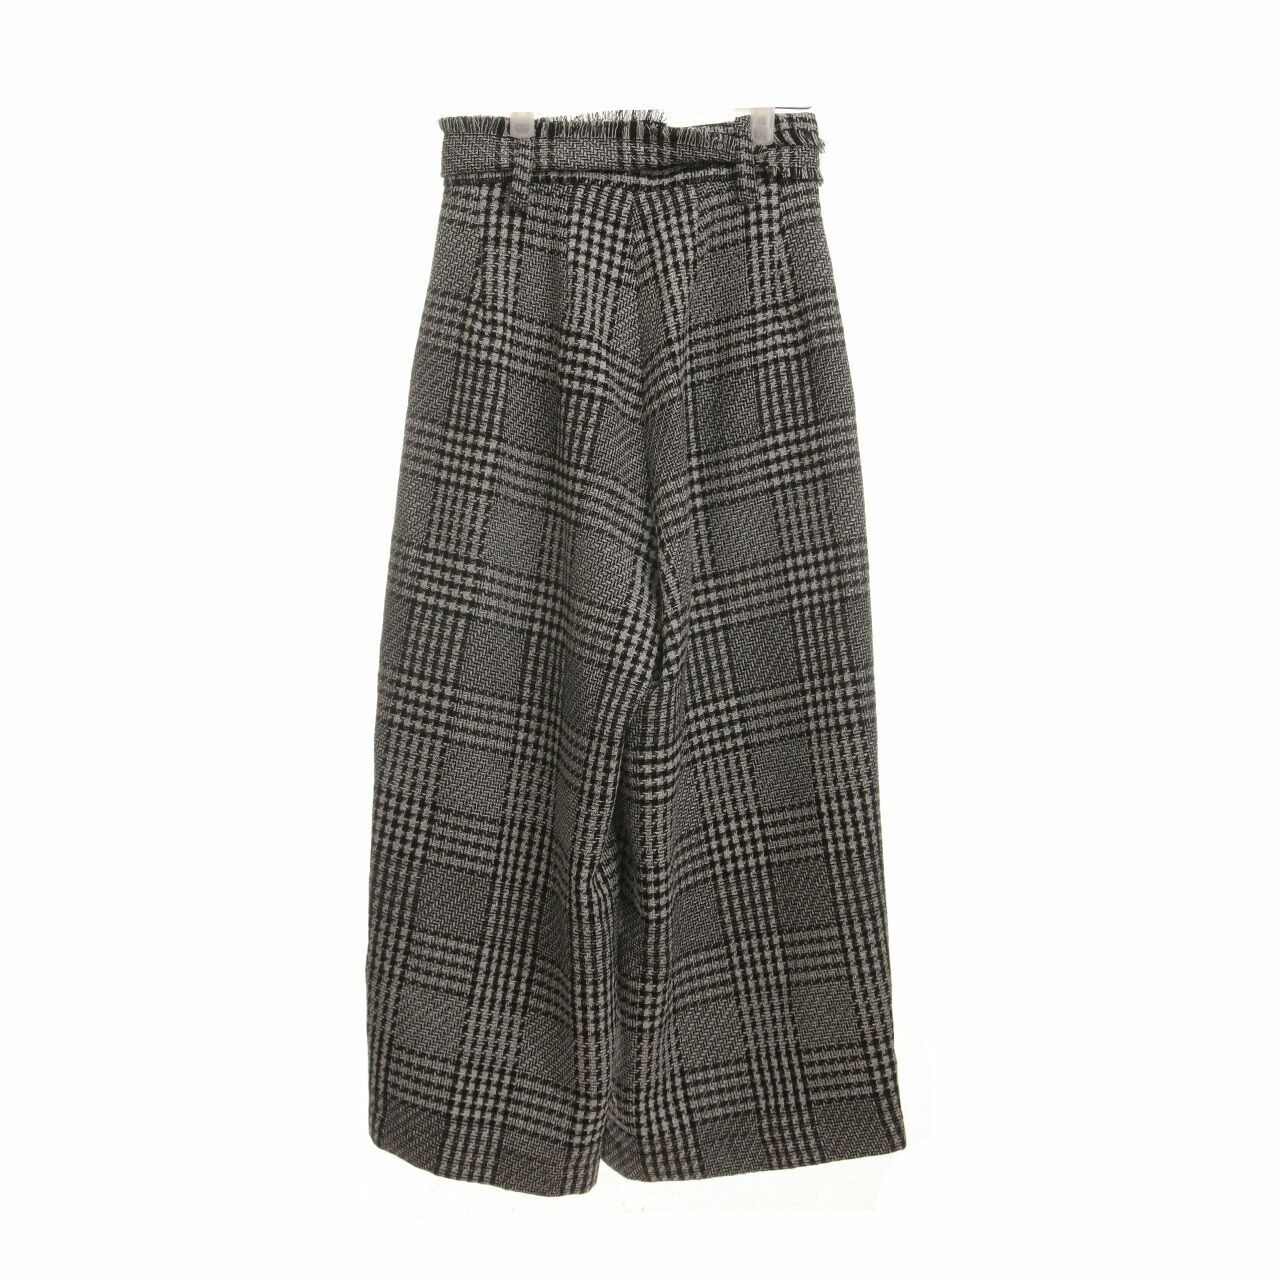 array Black & White Houndstooth Long Pants